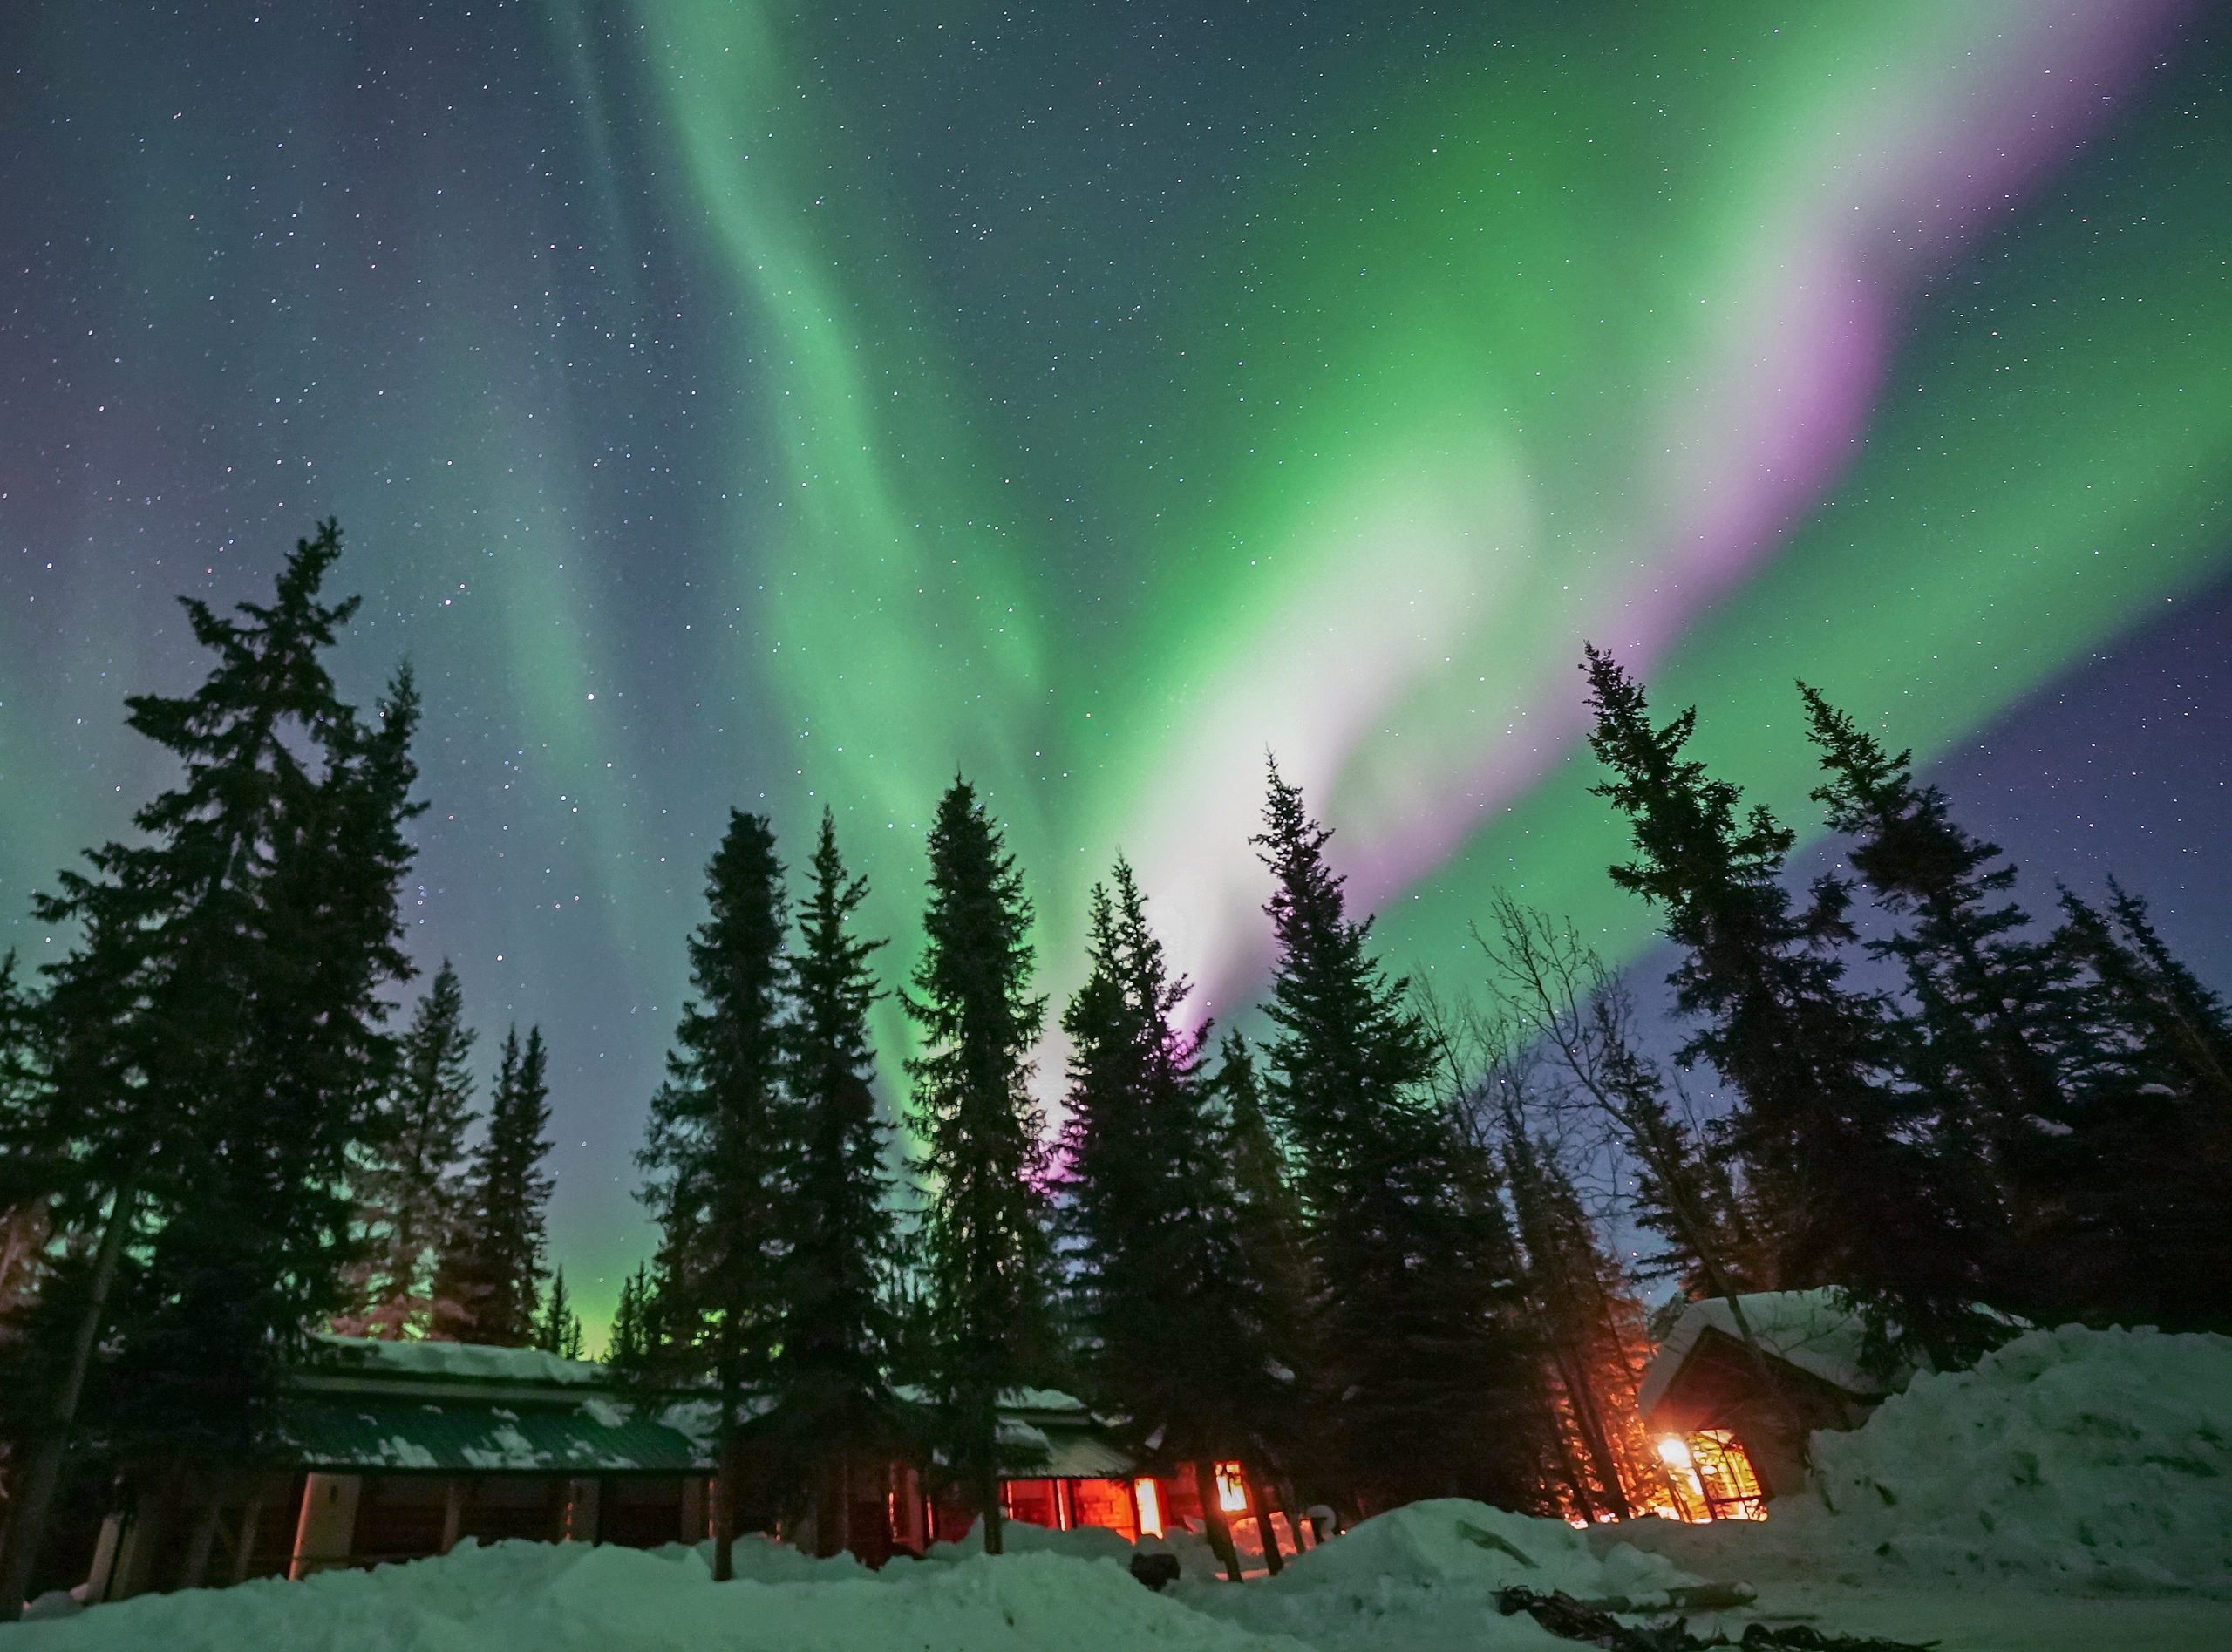 The northern lights dance above the Boreal Lodge in Wiseman in the spring.